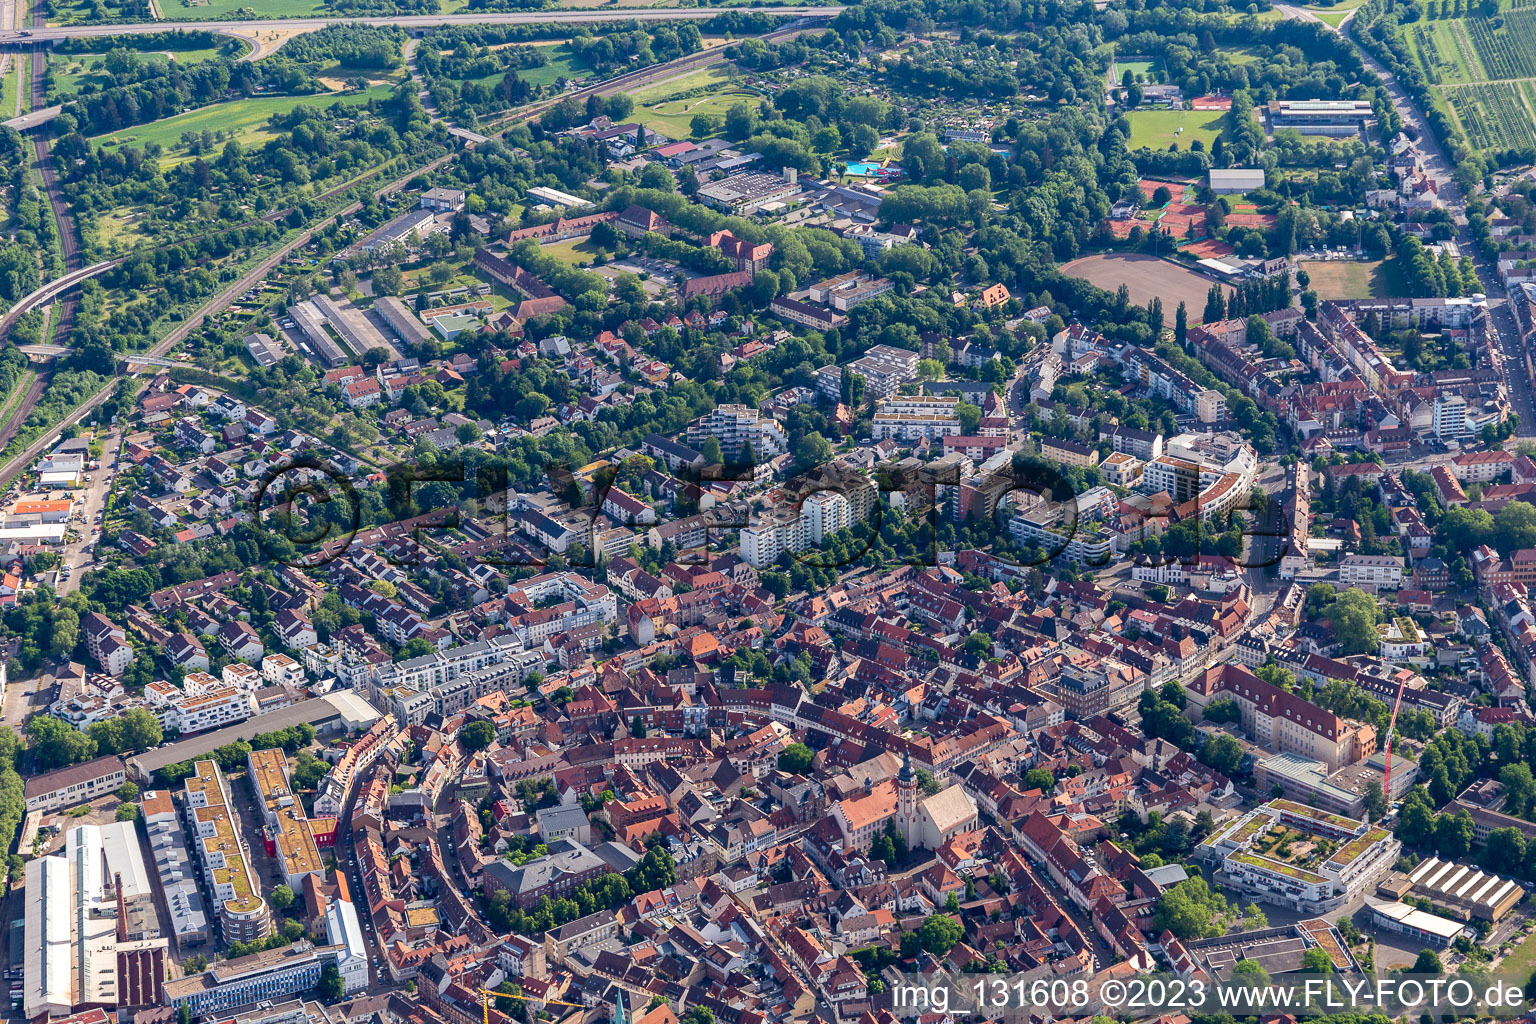 Historical old city in the district Durlach in Karlsruhe in the state Baden-Wuerttemberg, Germany